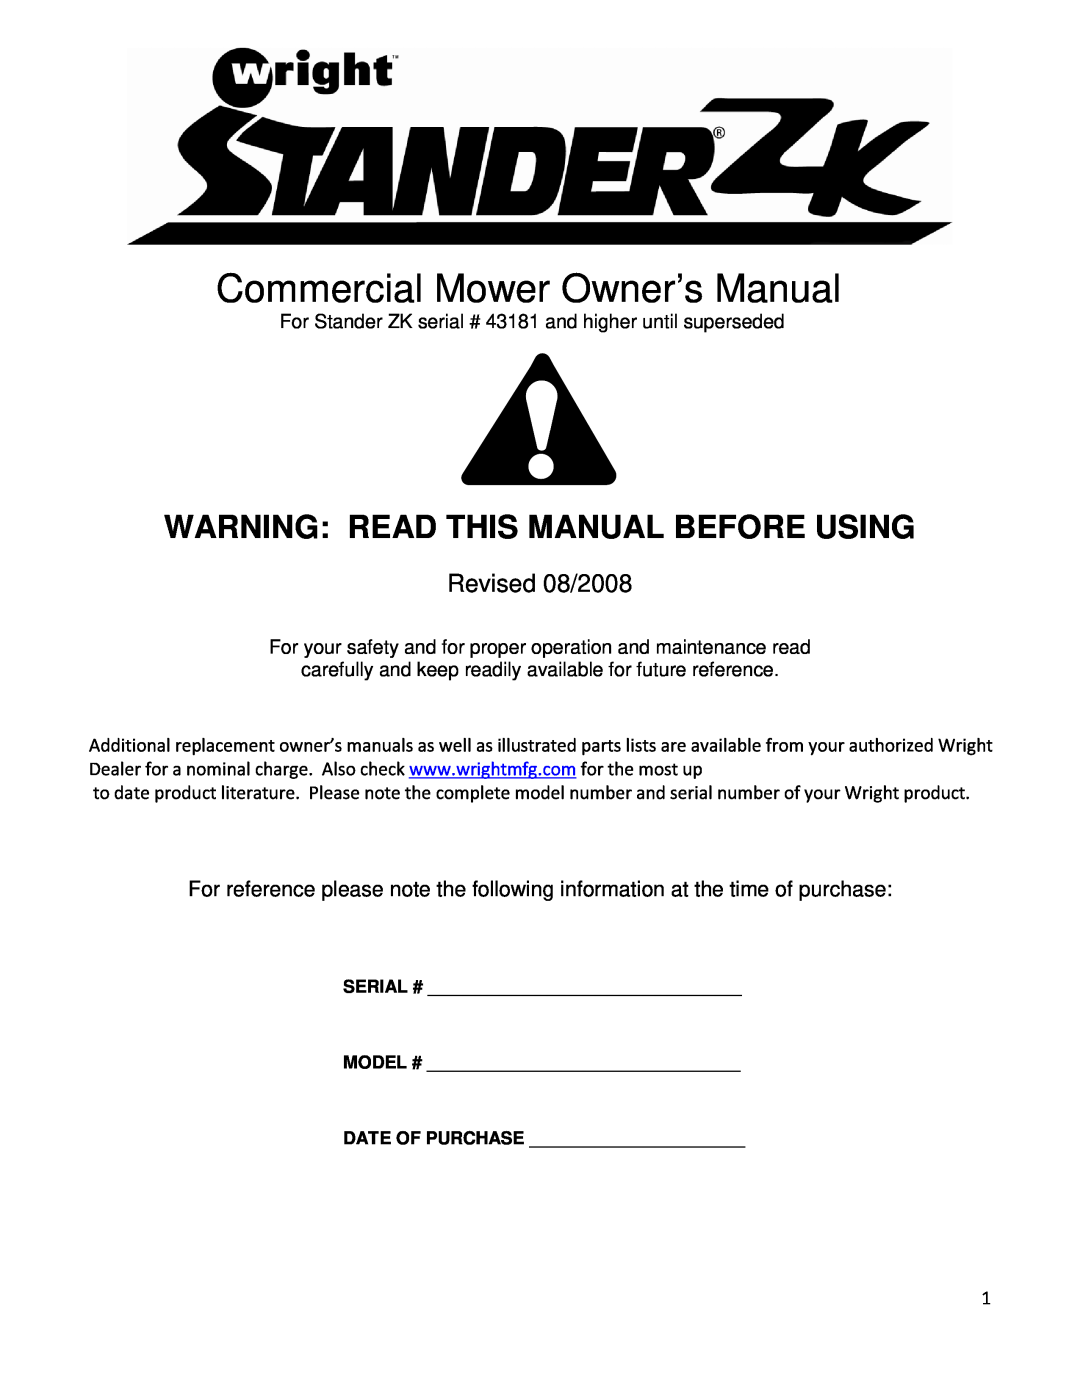 Wright Manufacturing 43181 owner manual Warning Read This Manual Before Using, Revised 08/2008 